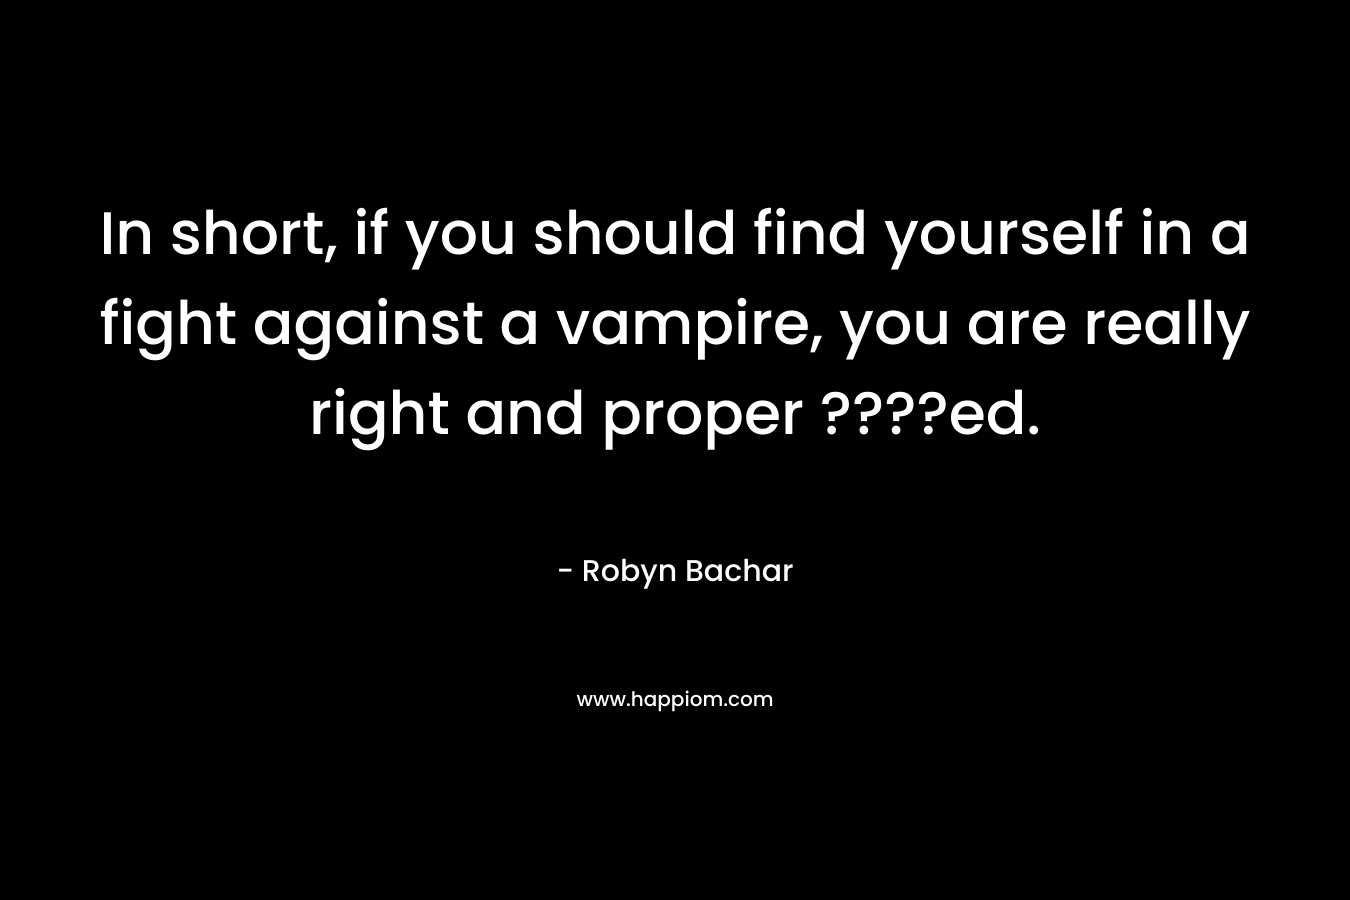 In short, if you should find yourself in a fight against a vampire, you are really right and proper ????ed. – Robyn Bachar